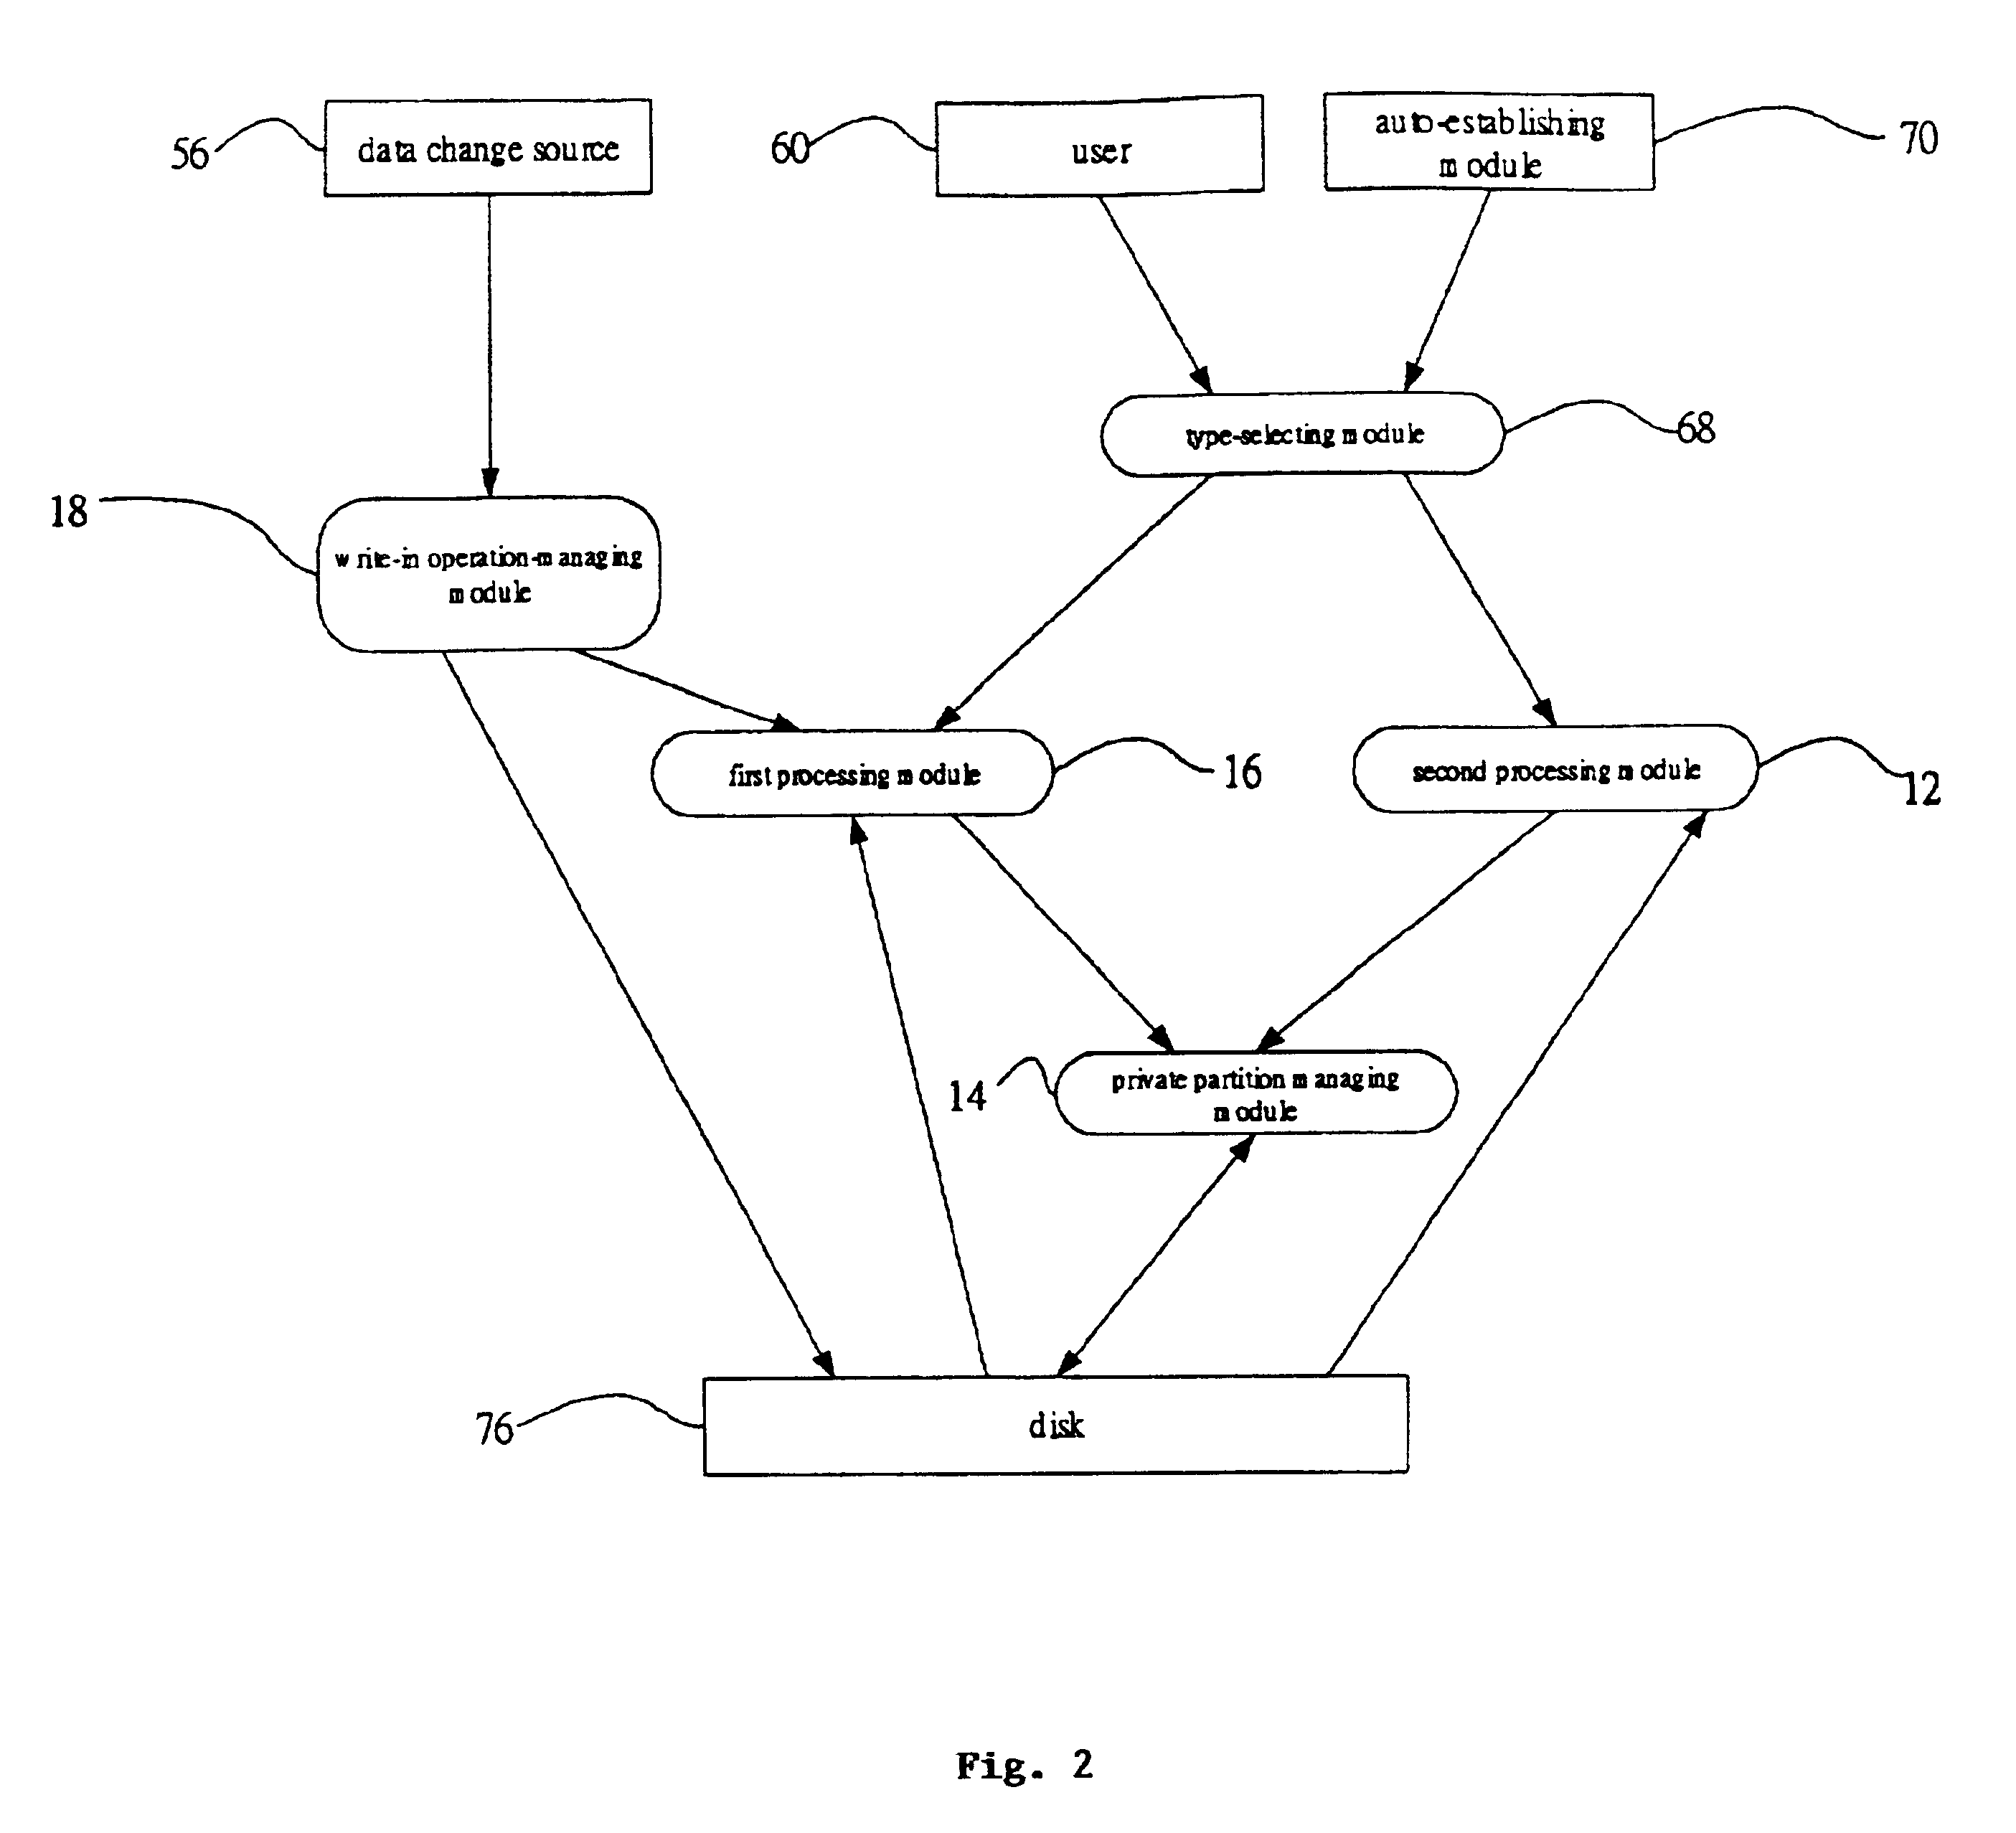 Backup/recovery system and methods regarding the same